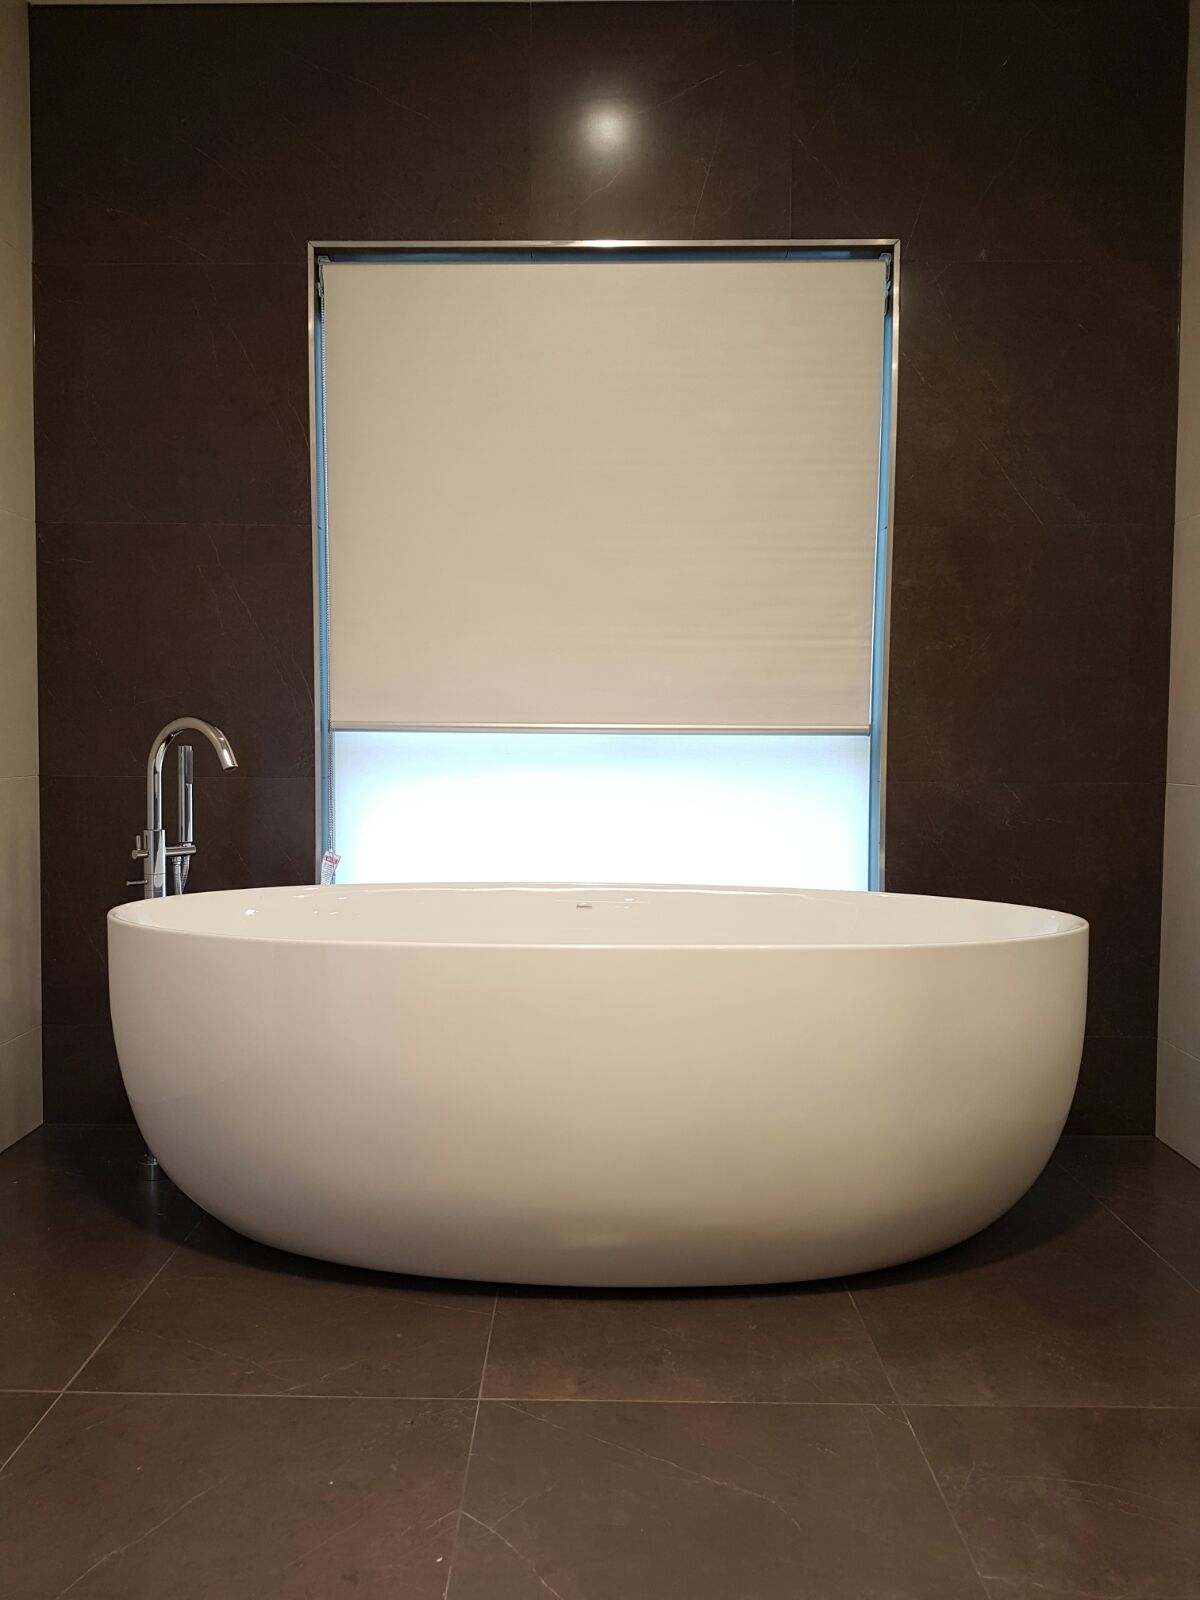 Double Roller blinds behind a large freestanding bathtub